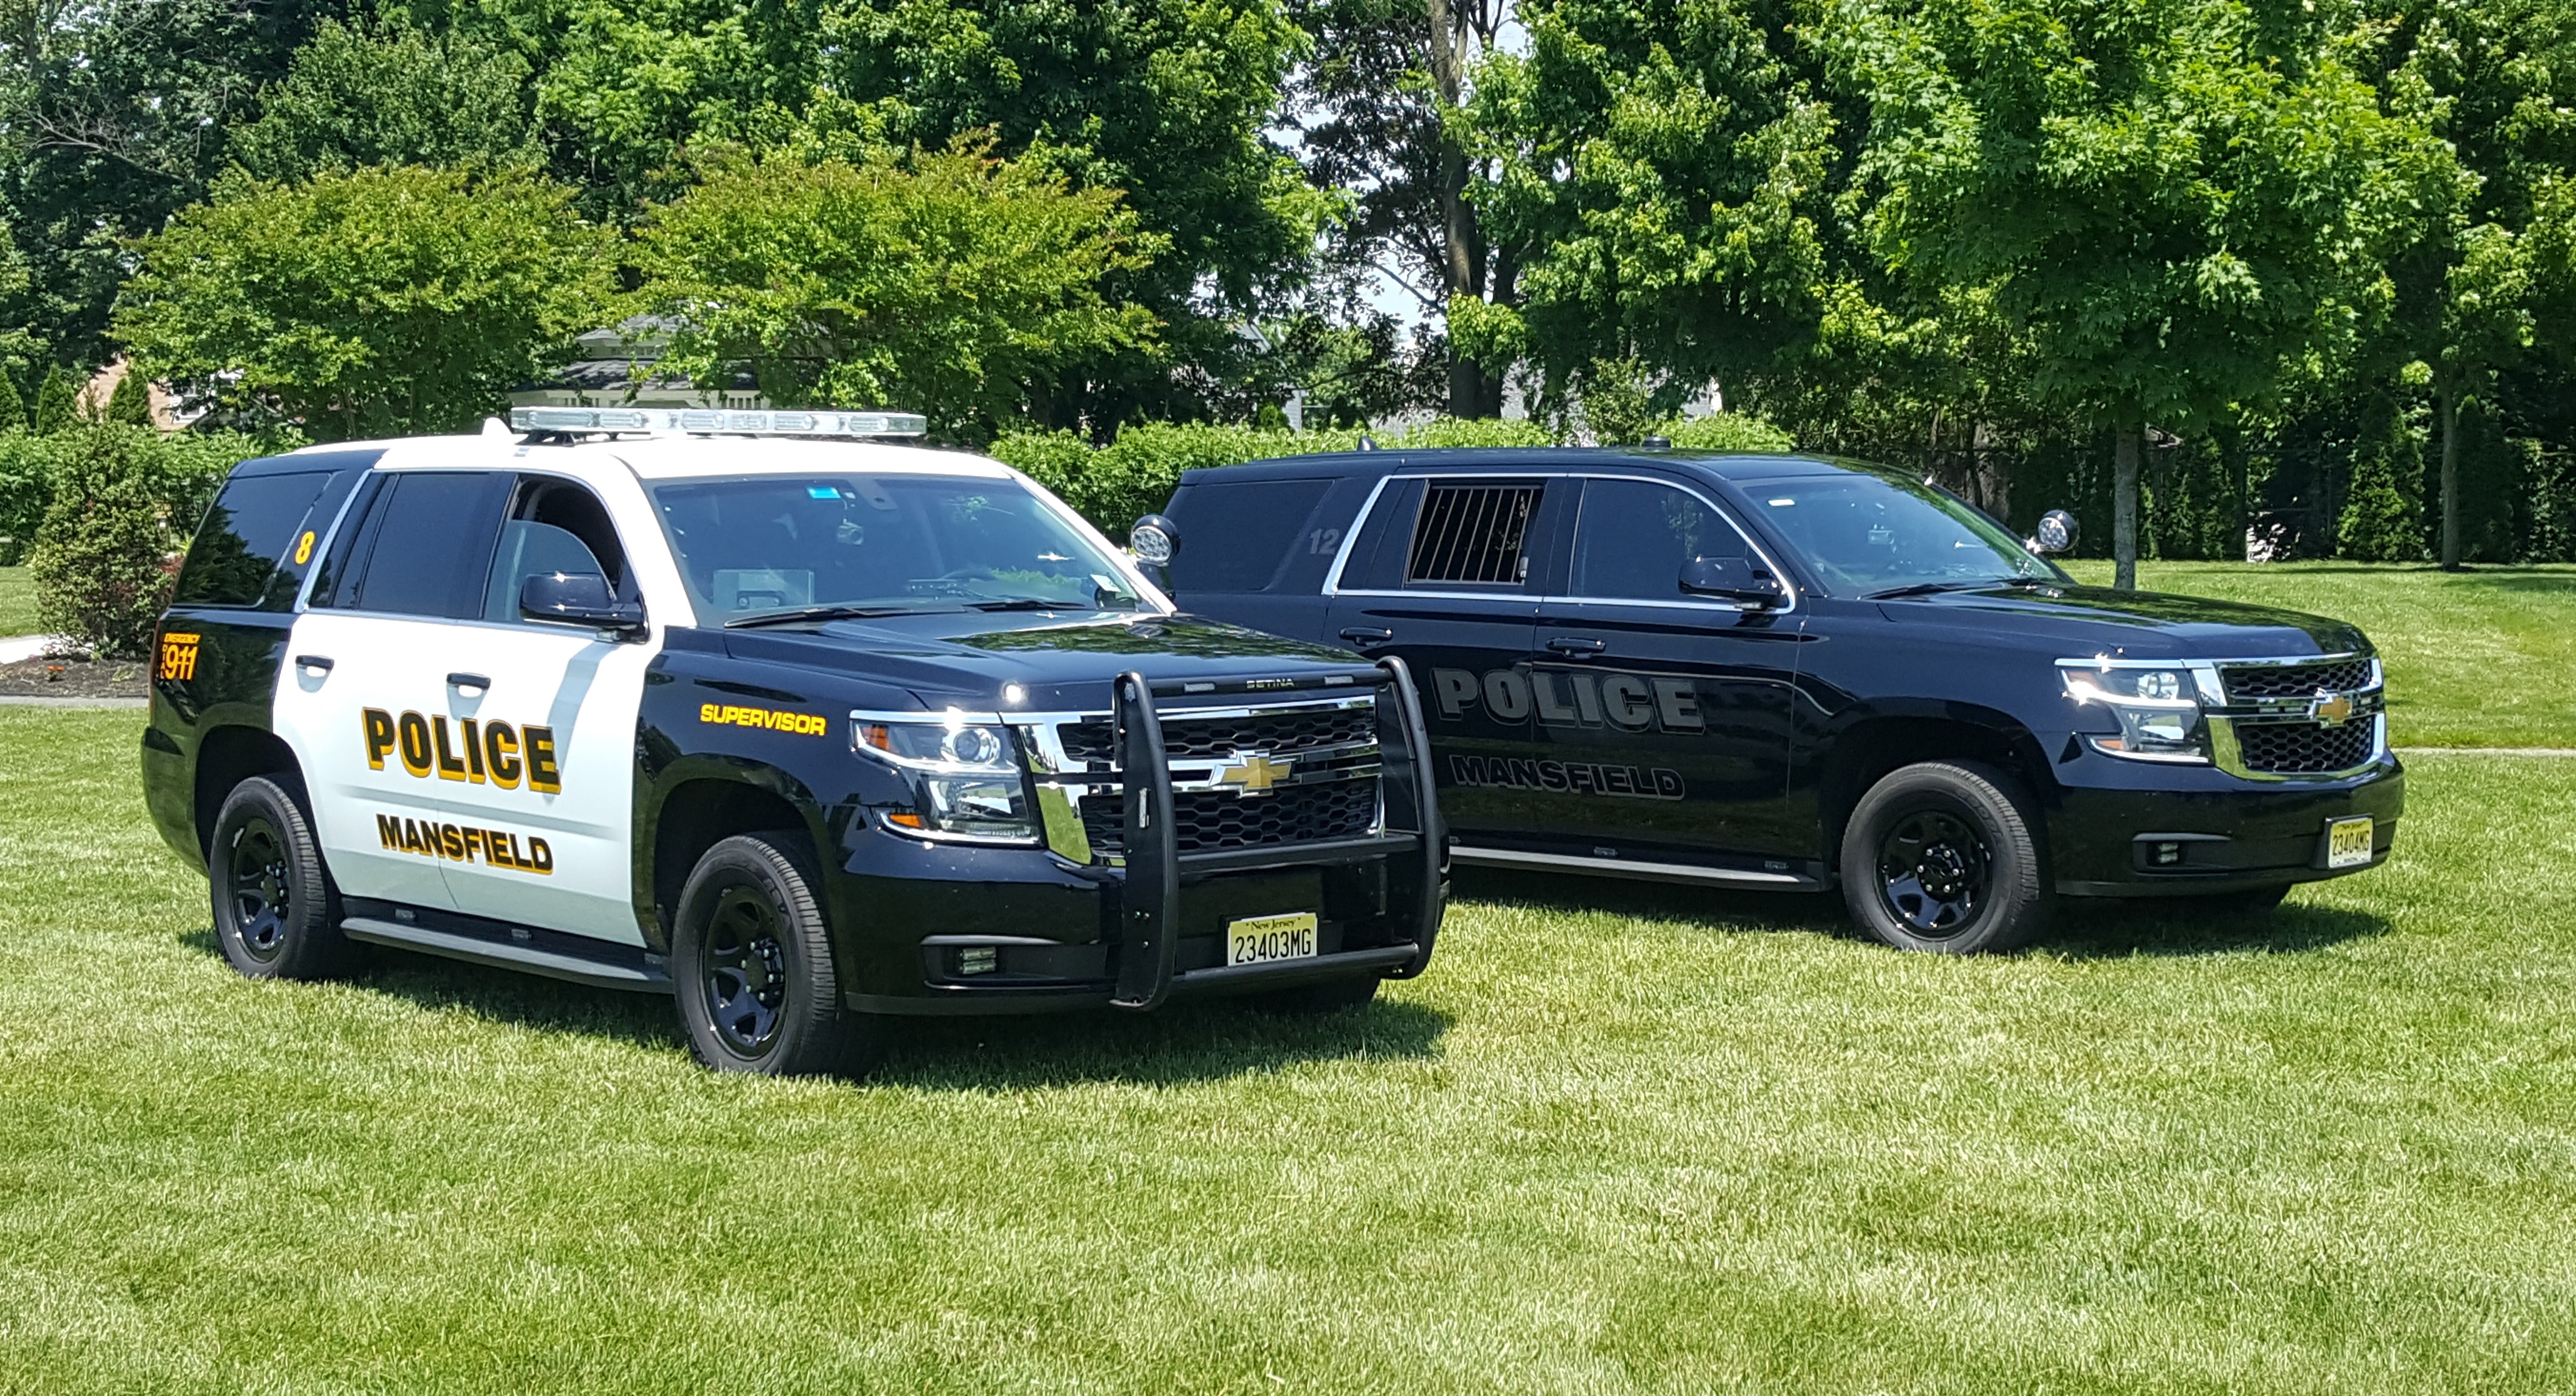 Mansfield PD Vehicles Image